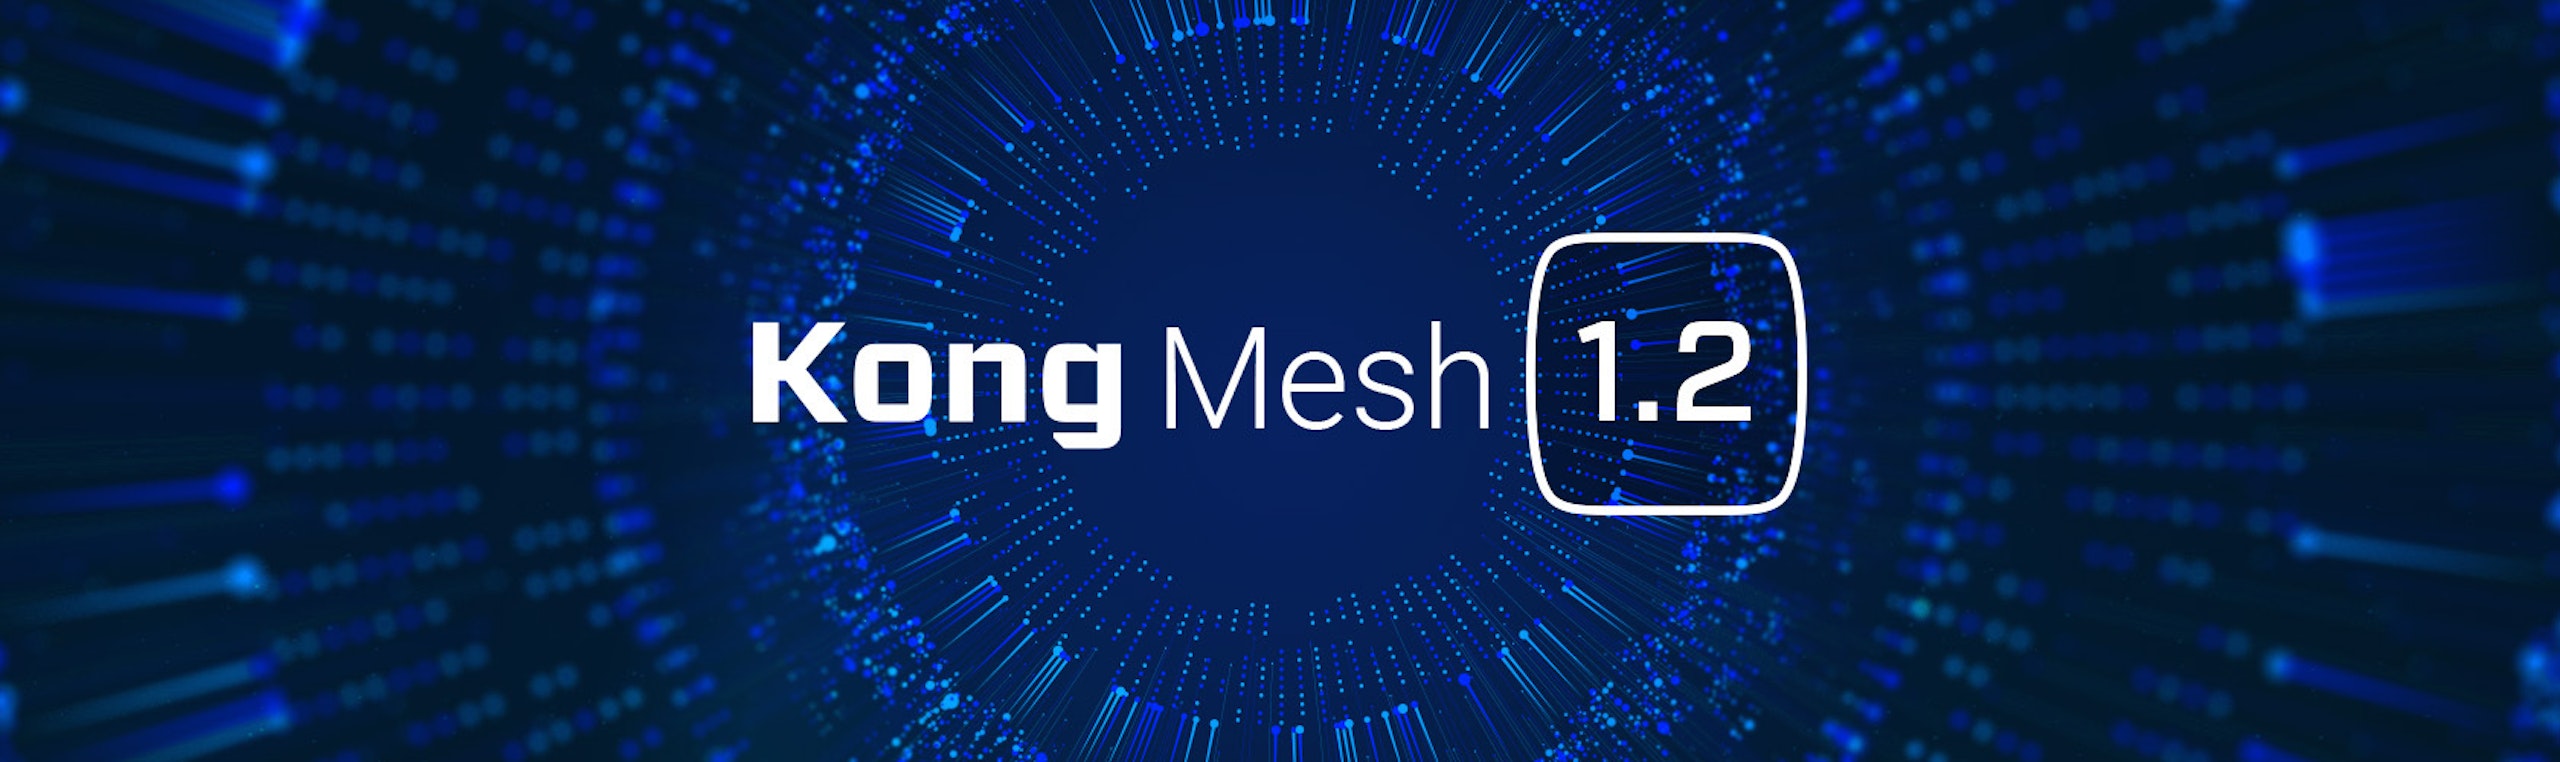 Kong Mesh 1.2 Is Here With Embedded OPA Support, FIPS 140-2 Compliance and Multi-Zone Authentication